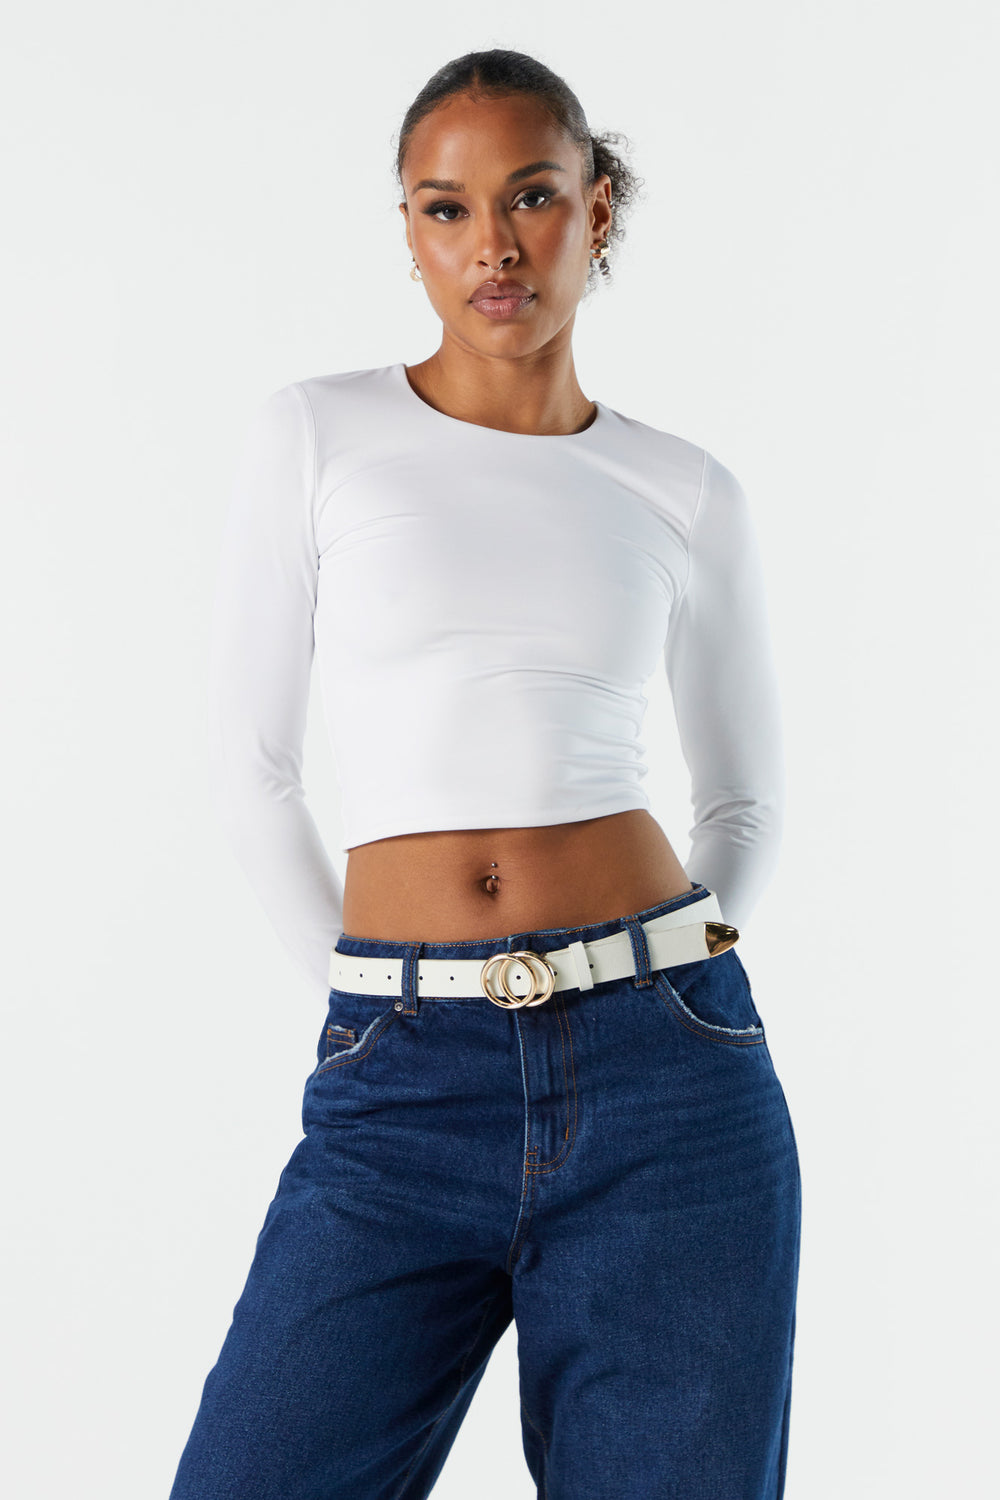 Contour Cropped Long Sleeve Top Contour Cropped Long Sleeve Top 7